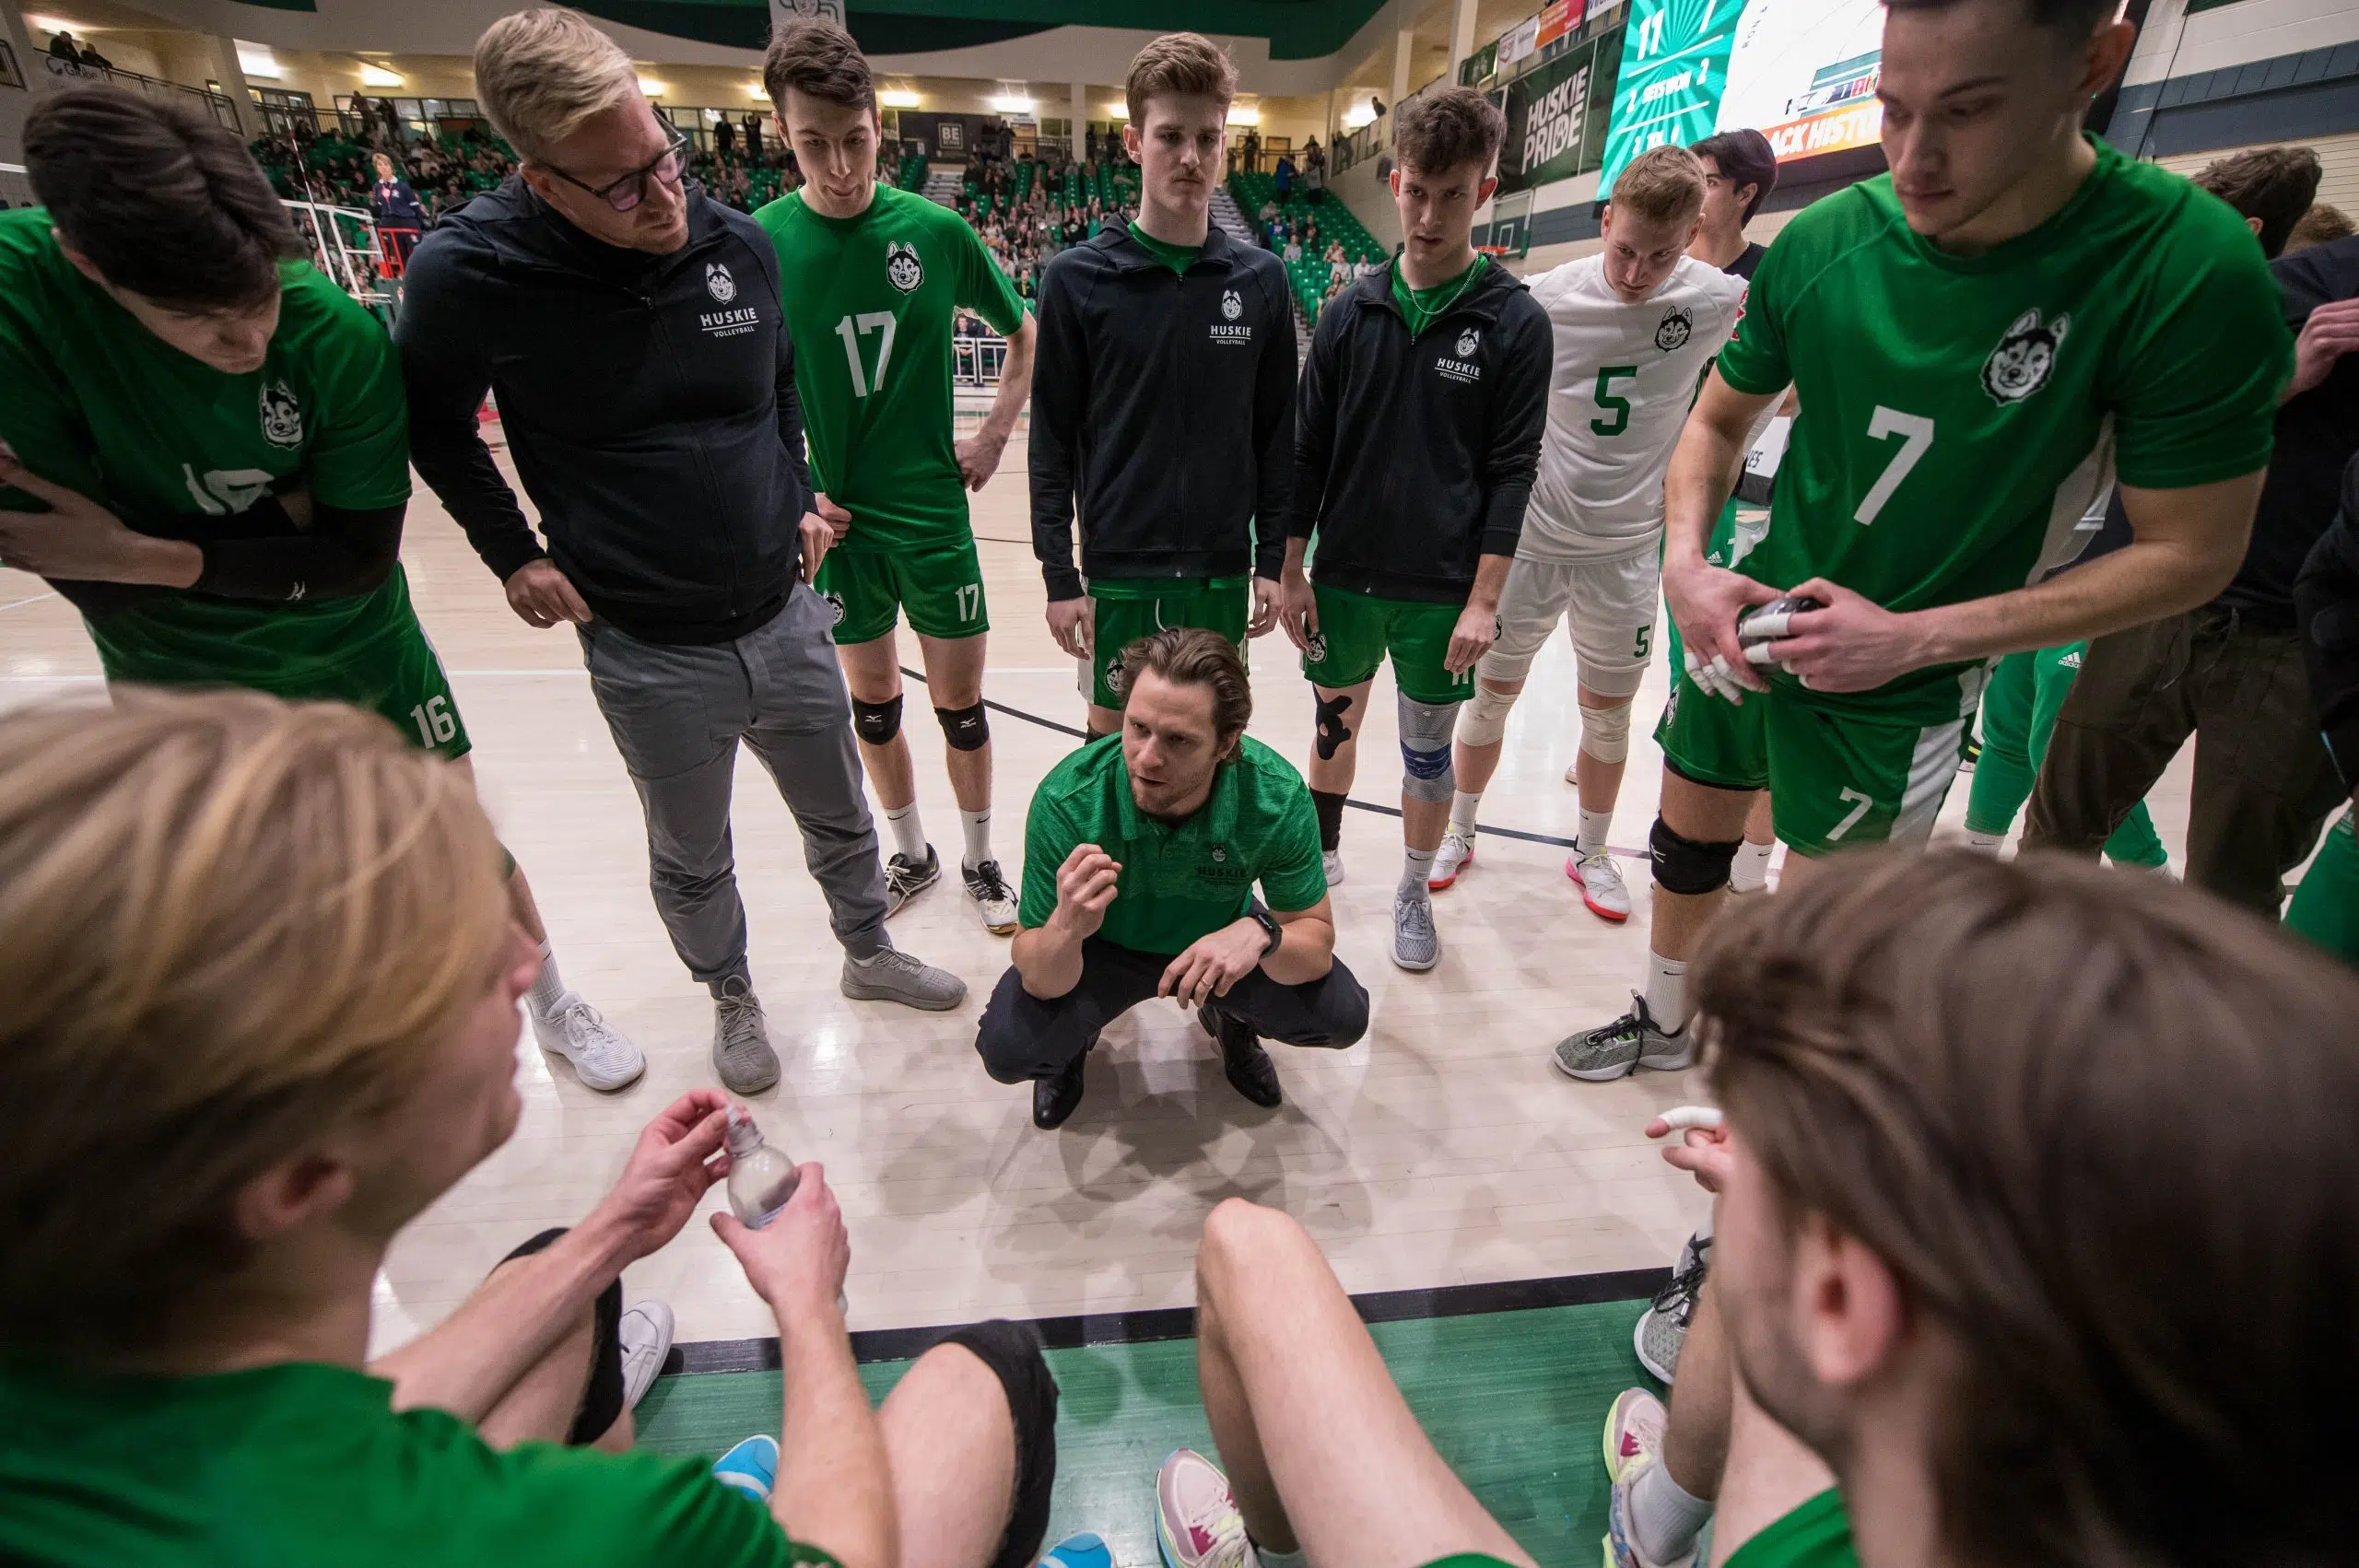 'The championship is the goal:' Huskie volleyball takes national stage